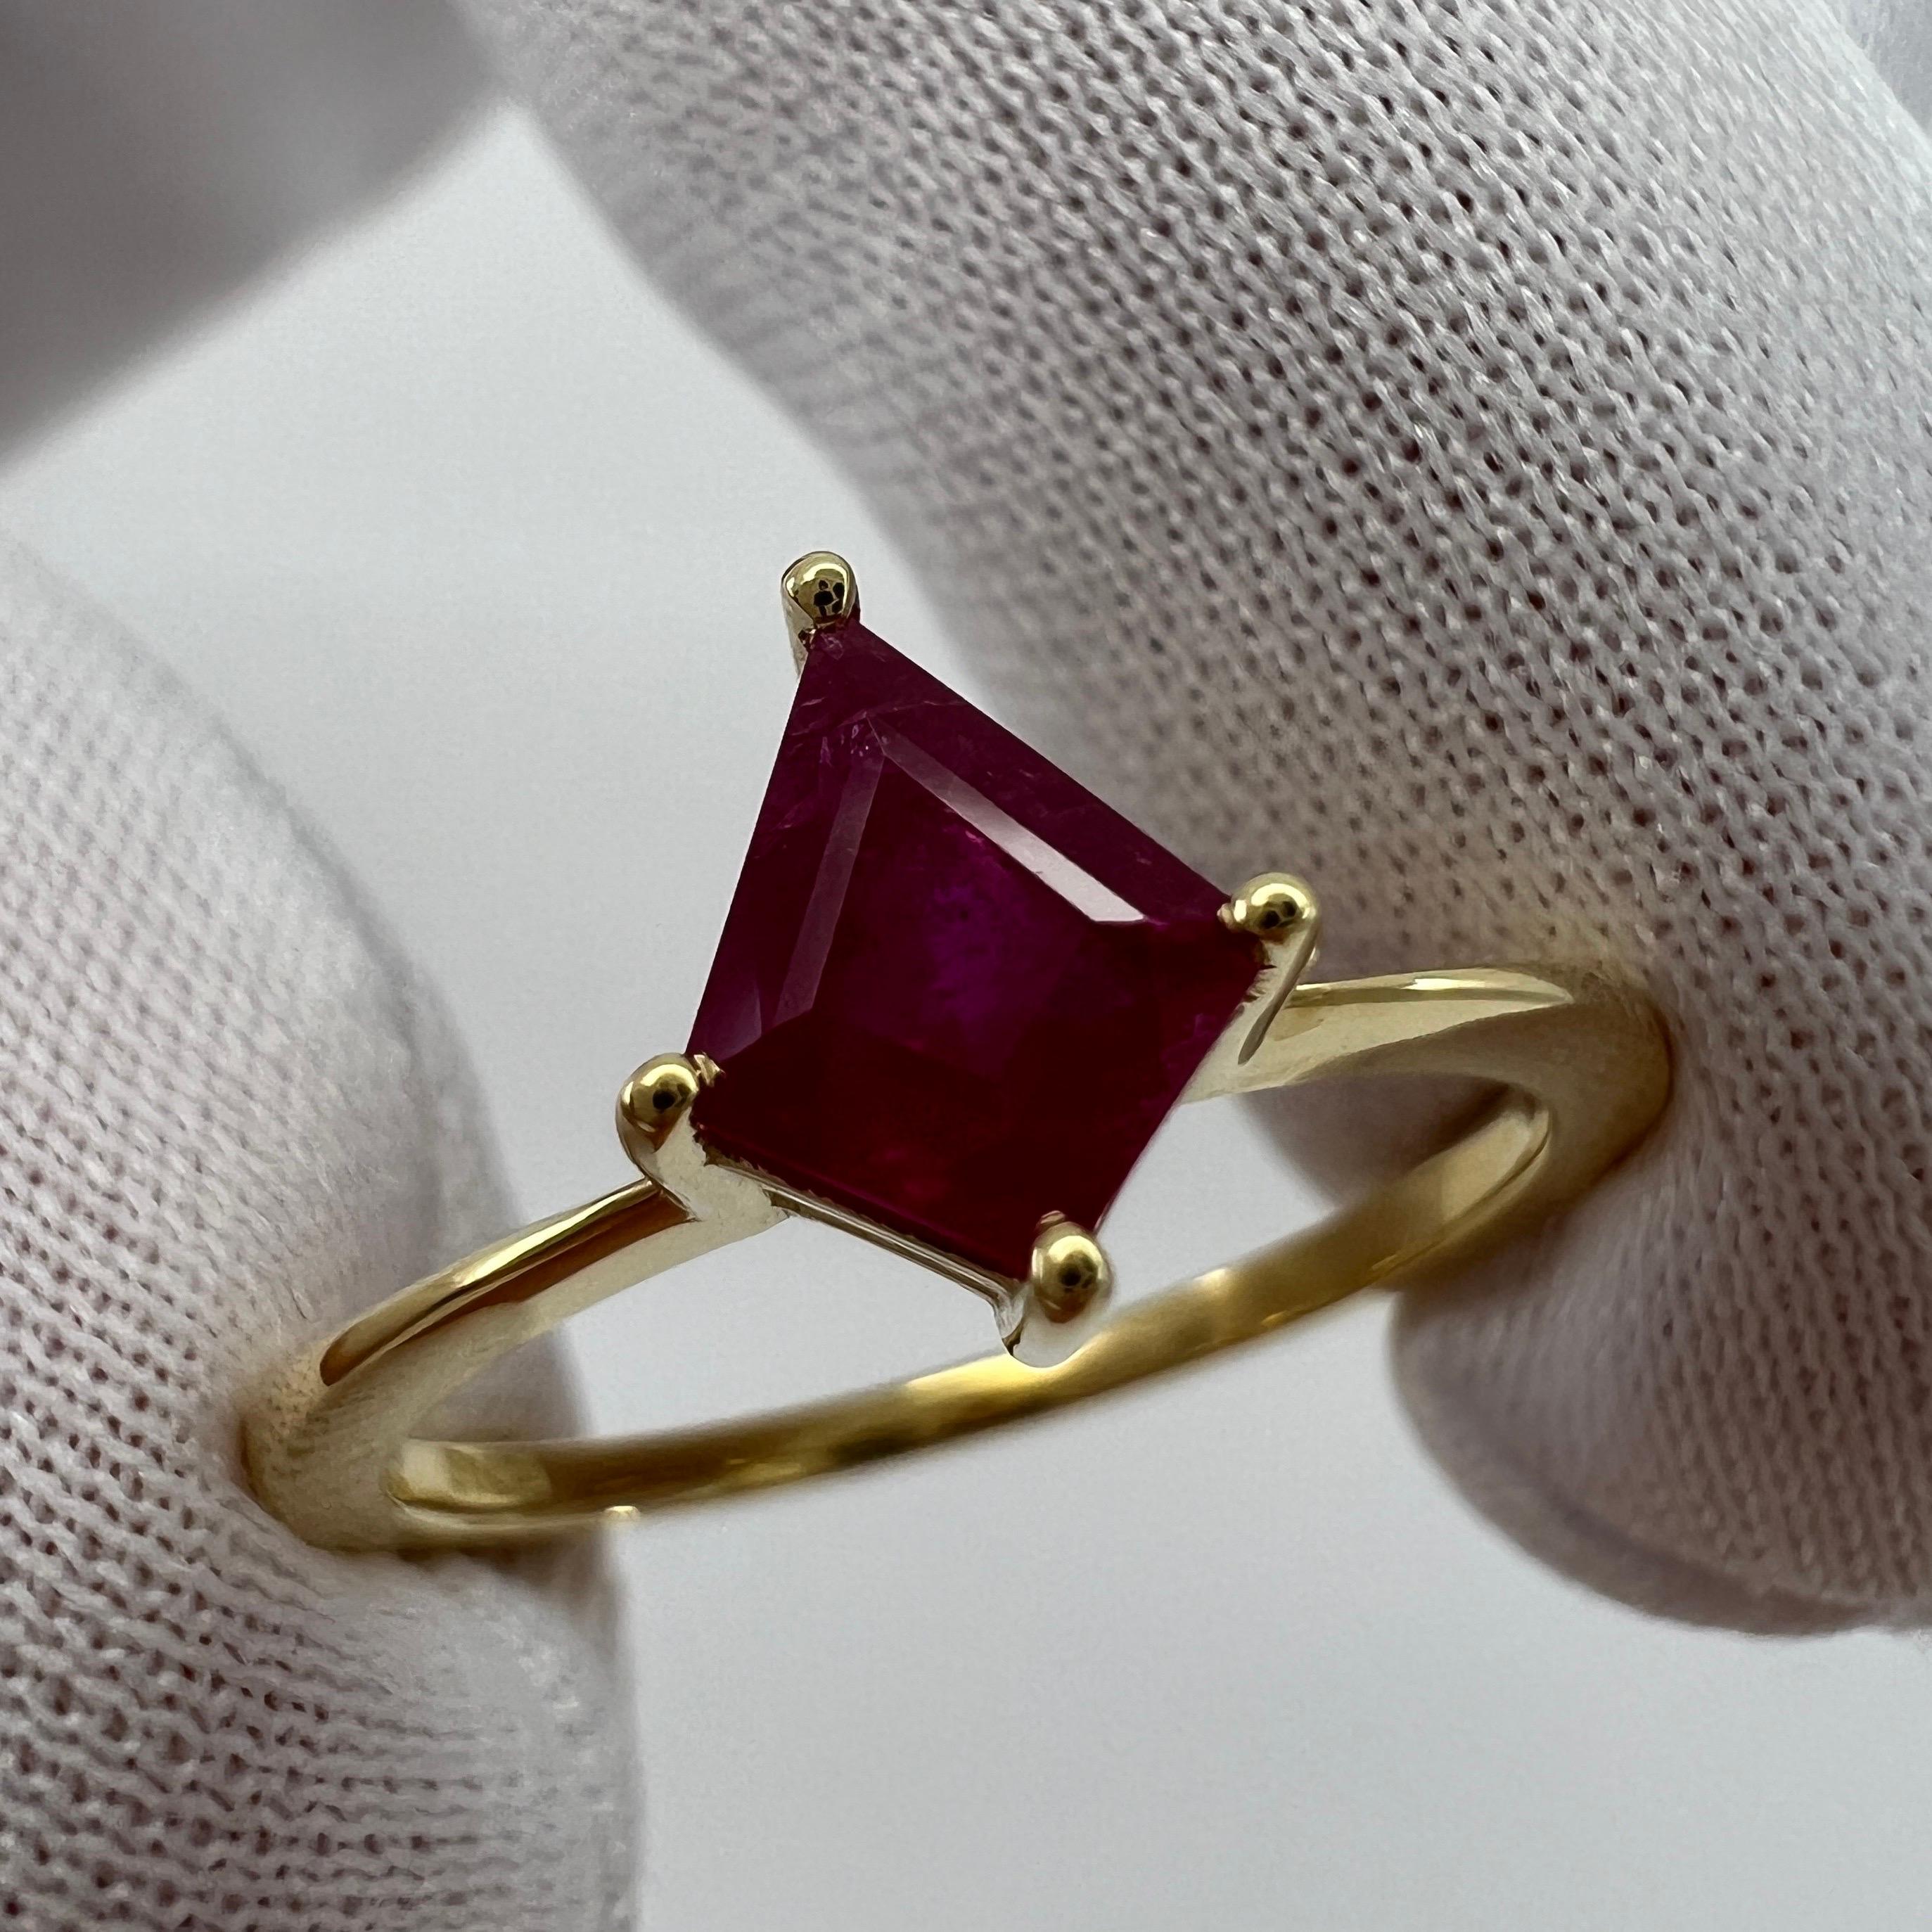 0.73 Carat Pinkish Red Ruby Fancy Kite Cut 18k Yellow Gold Modern Solitaire Ring For Sale 2